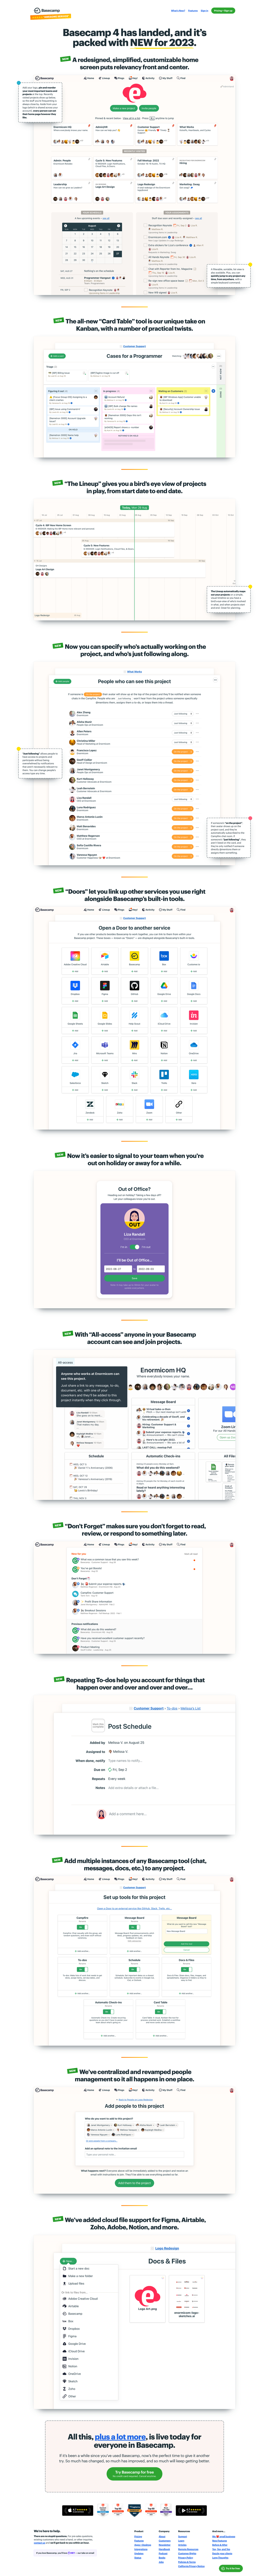 Basecamp Landing Page Example: Basecamp’s the project management platform that helps small teams move faster and make more progress than they ever thought possible.